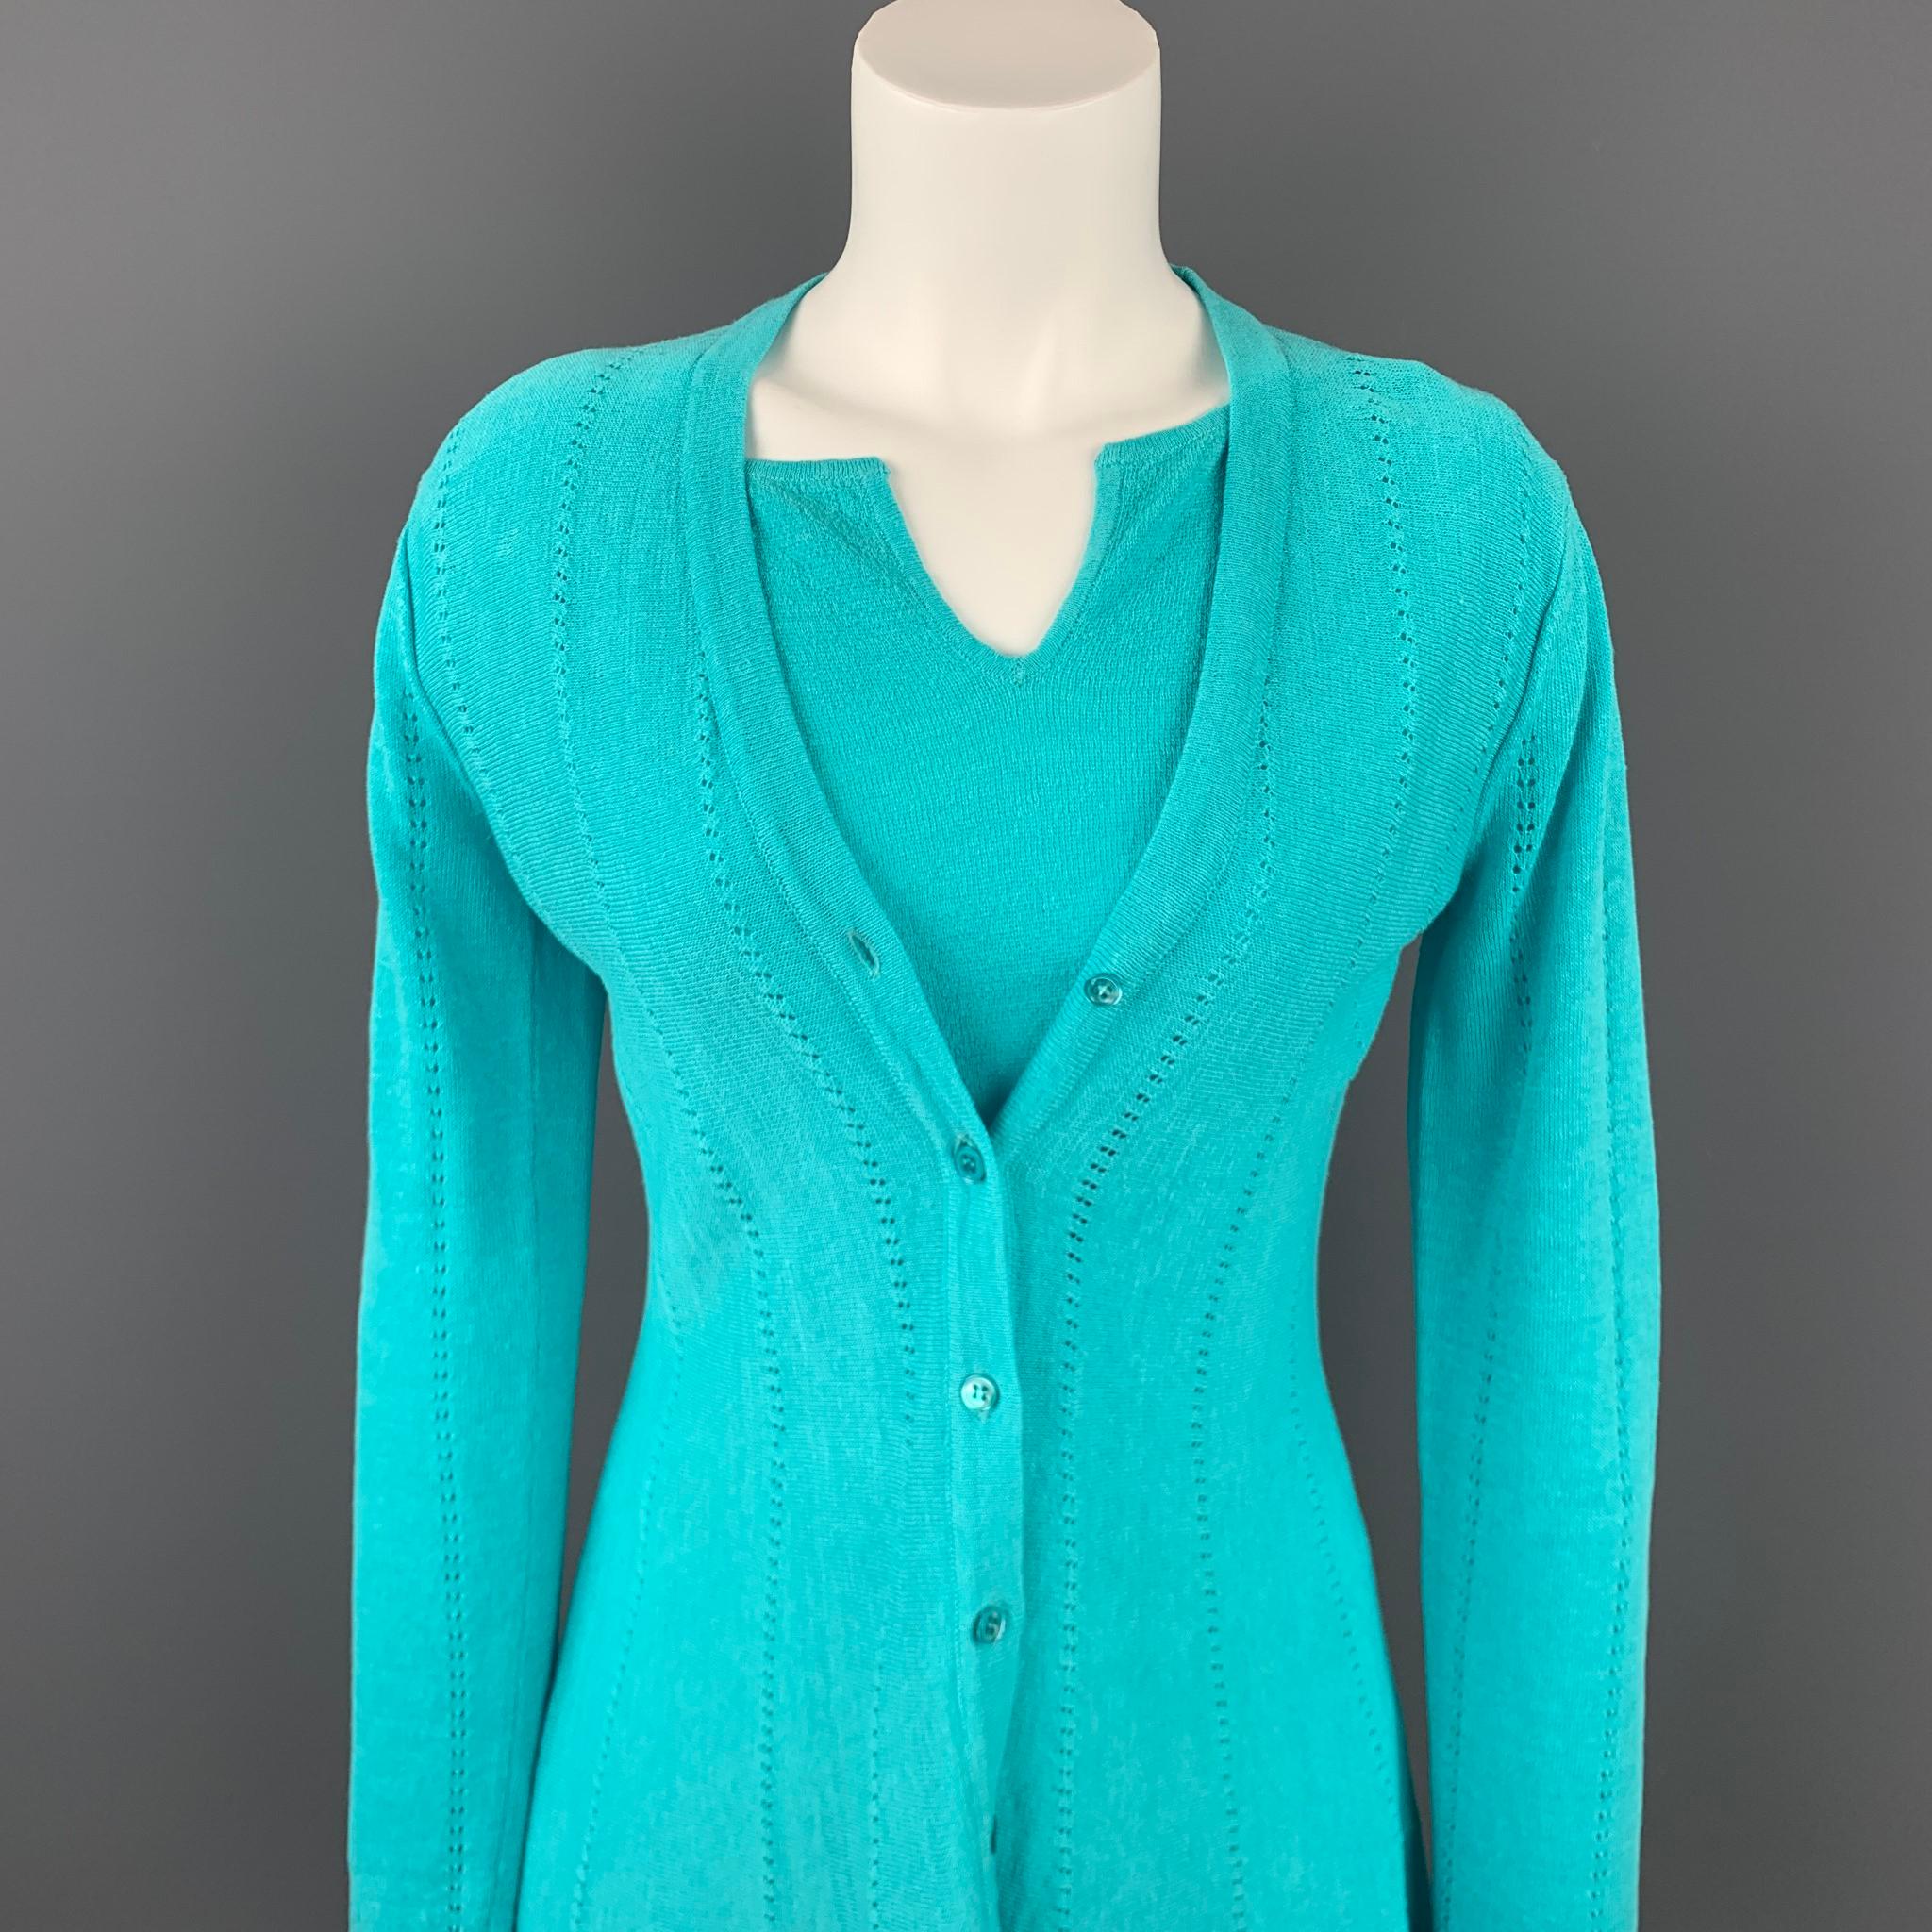 DONCASTER SIGNATURE cardigan 2 Piece set comes in a turquoise linen blend featuring a match short sleeve shirt and a buttoned closure. 

Very Good Pre-Owned Condition.
Marked: XS

Measurements:

-Cardigan

Shoulder: 17 in.
Bust: 34 in. 
Sleeve: 25